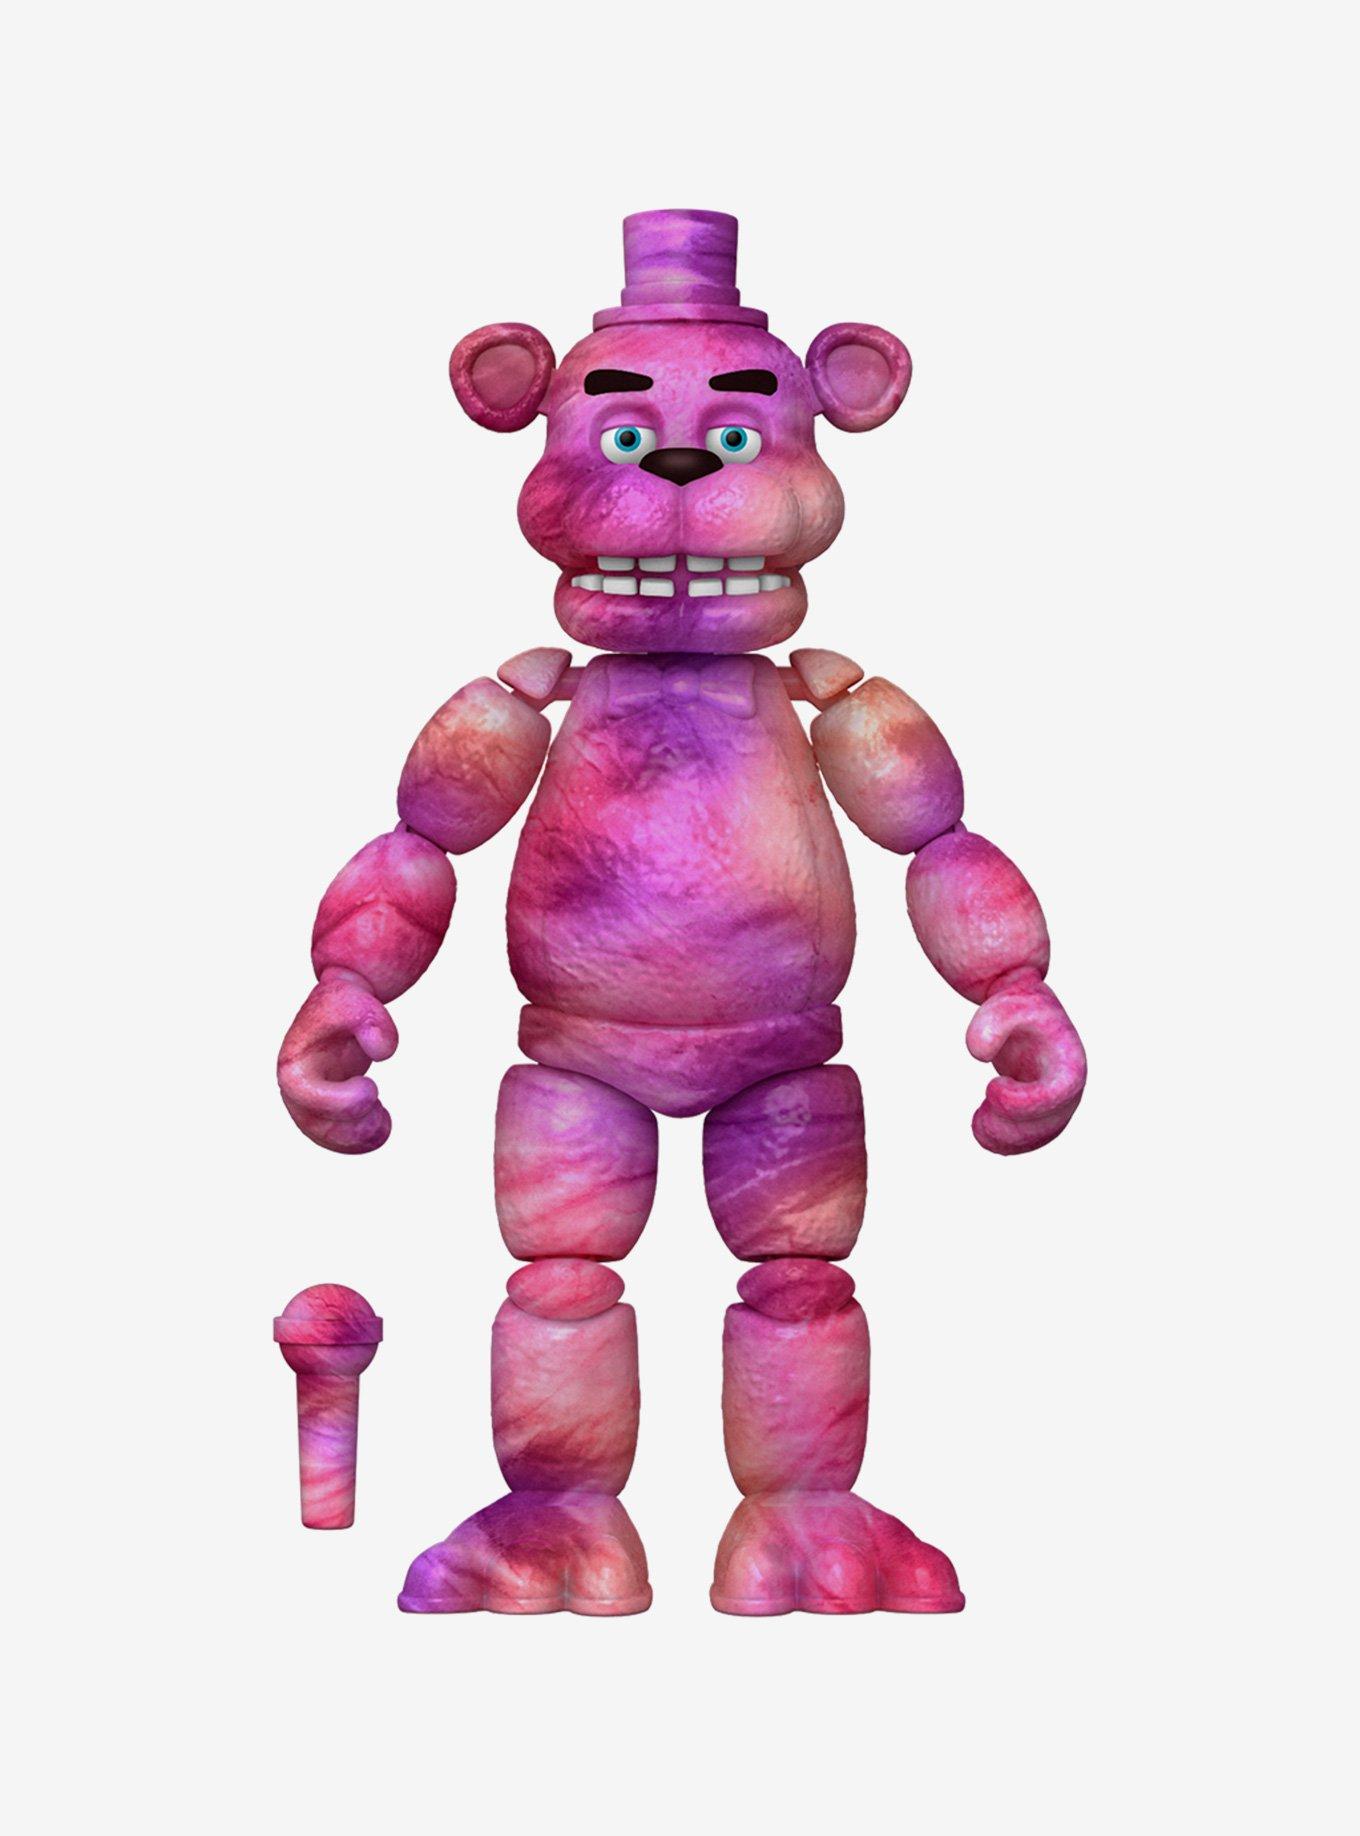 Funtime Freddy Five Nights at Freddy's Video Game Minifigure